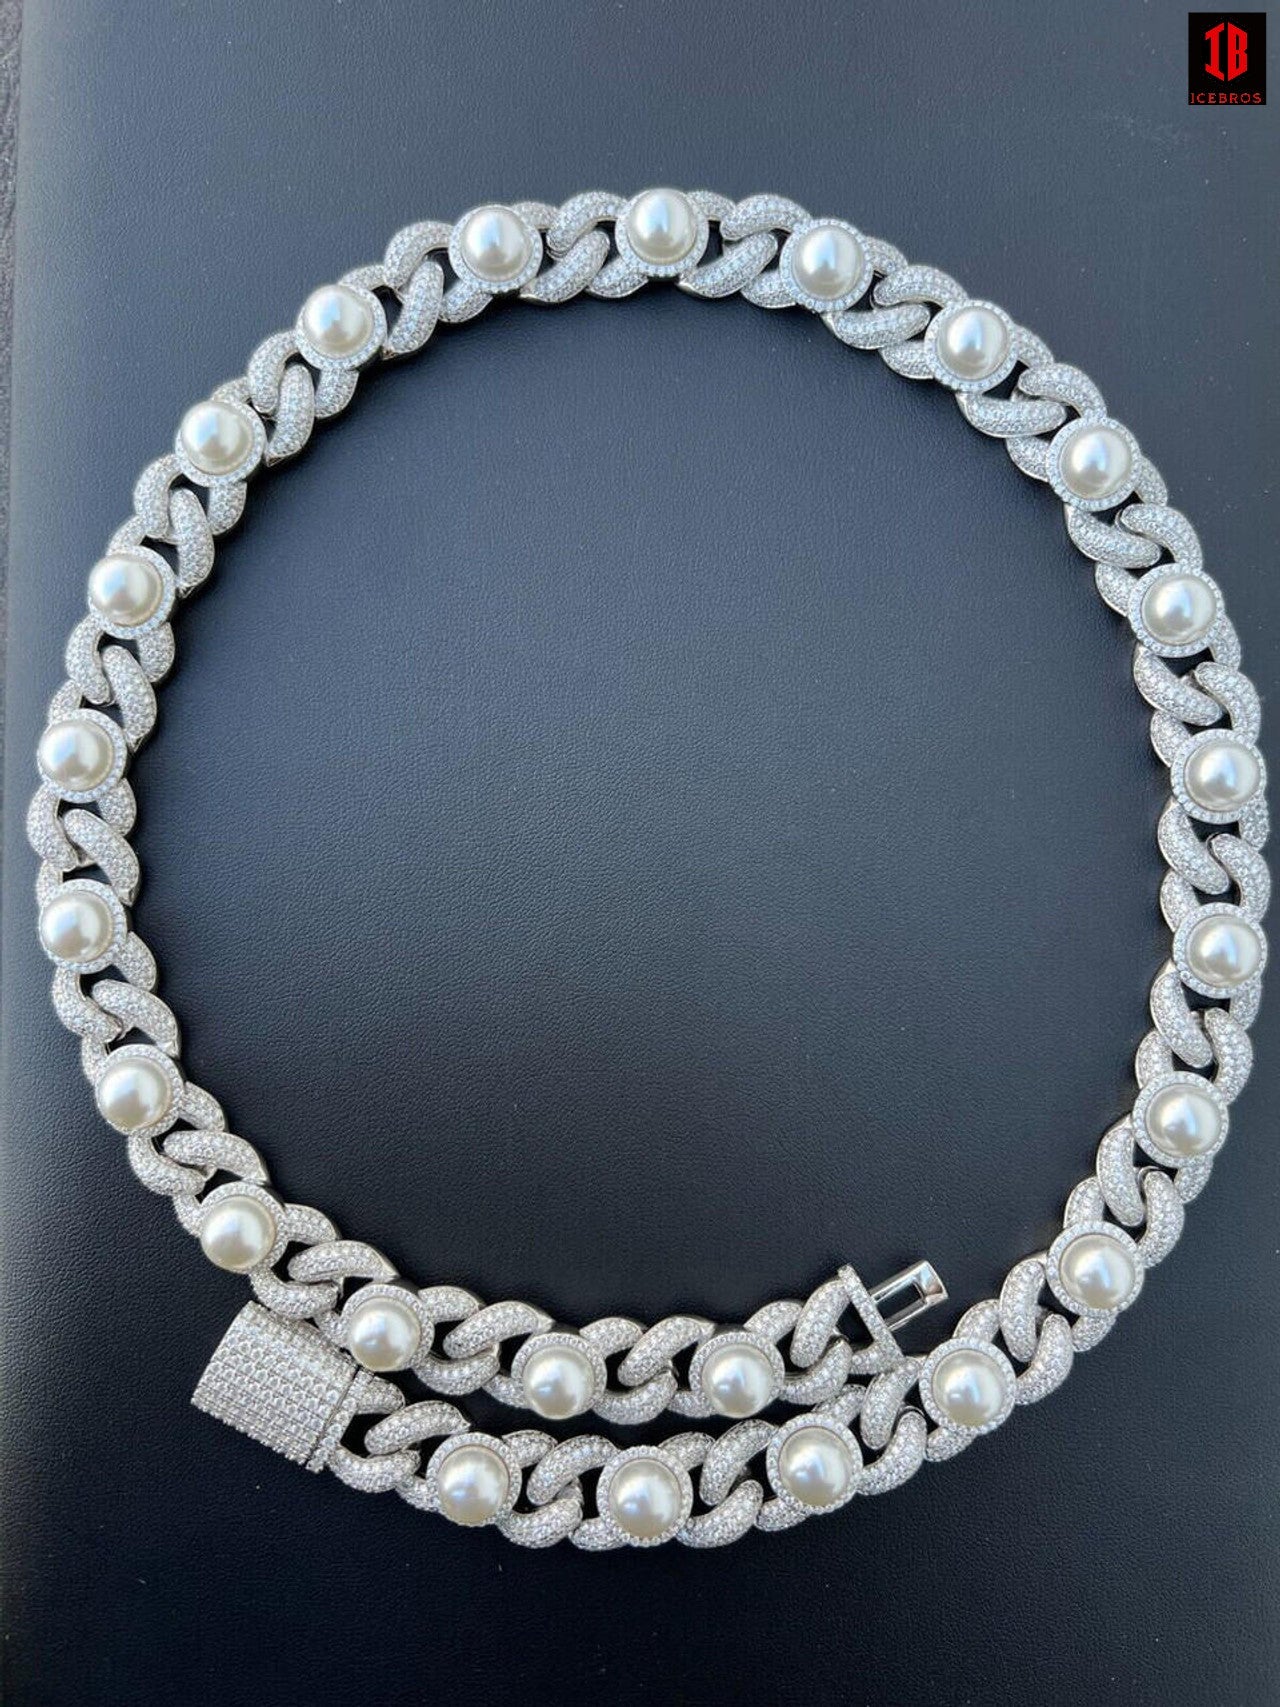 15mm White Gold Infinity Link Pearl Link Necklace Showing the Complete Large White Gold Pearl Chain